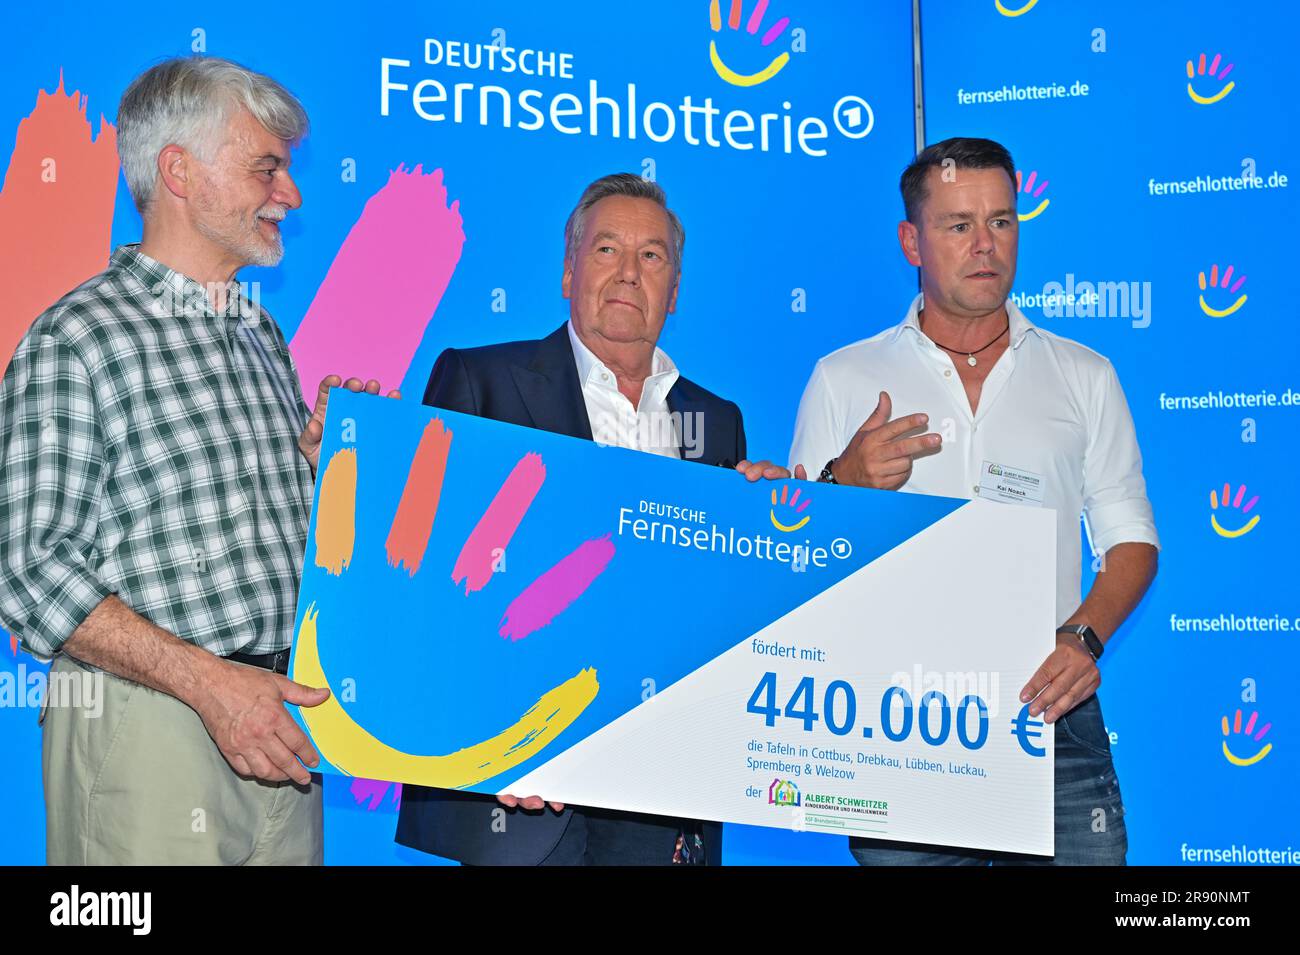 23 June 2023, Brandenburg, Cottbus: Christian Kipper (l), Managing Director of Deutsche Fernsehlotterie GmbH, hands over a donation to Cottbus Tafel amounting to 440,000 euros to Roland Kaiser (M), pop singer and honorary ambassador of Albert-Schweitzer-Familienwerk Brandenburg e.V. as well as patron of Tafel Cottbus, and Kai Noack (r), Managing Director of Albert-Schweitzer-Familienwerk Brandenburg. On the occasion of the check handover to the Tafel work of the Albert-Schweitzer-Familienwerk Brandenburg e.V., Roland Kaiser visited the Tafel Cottbus and, together with volunteers, distributed f Stock Photo